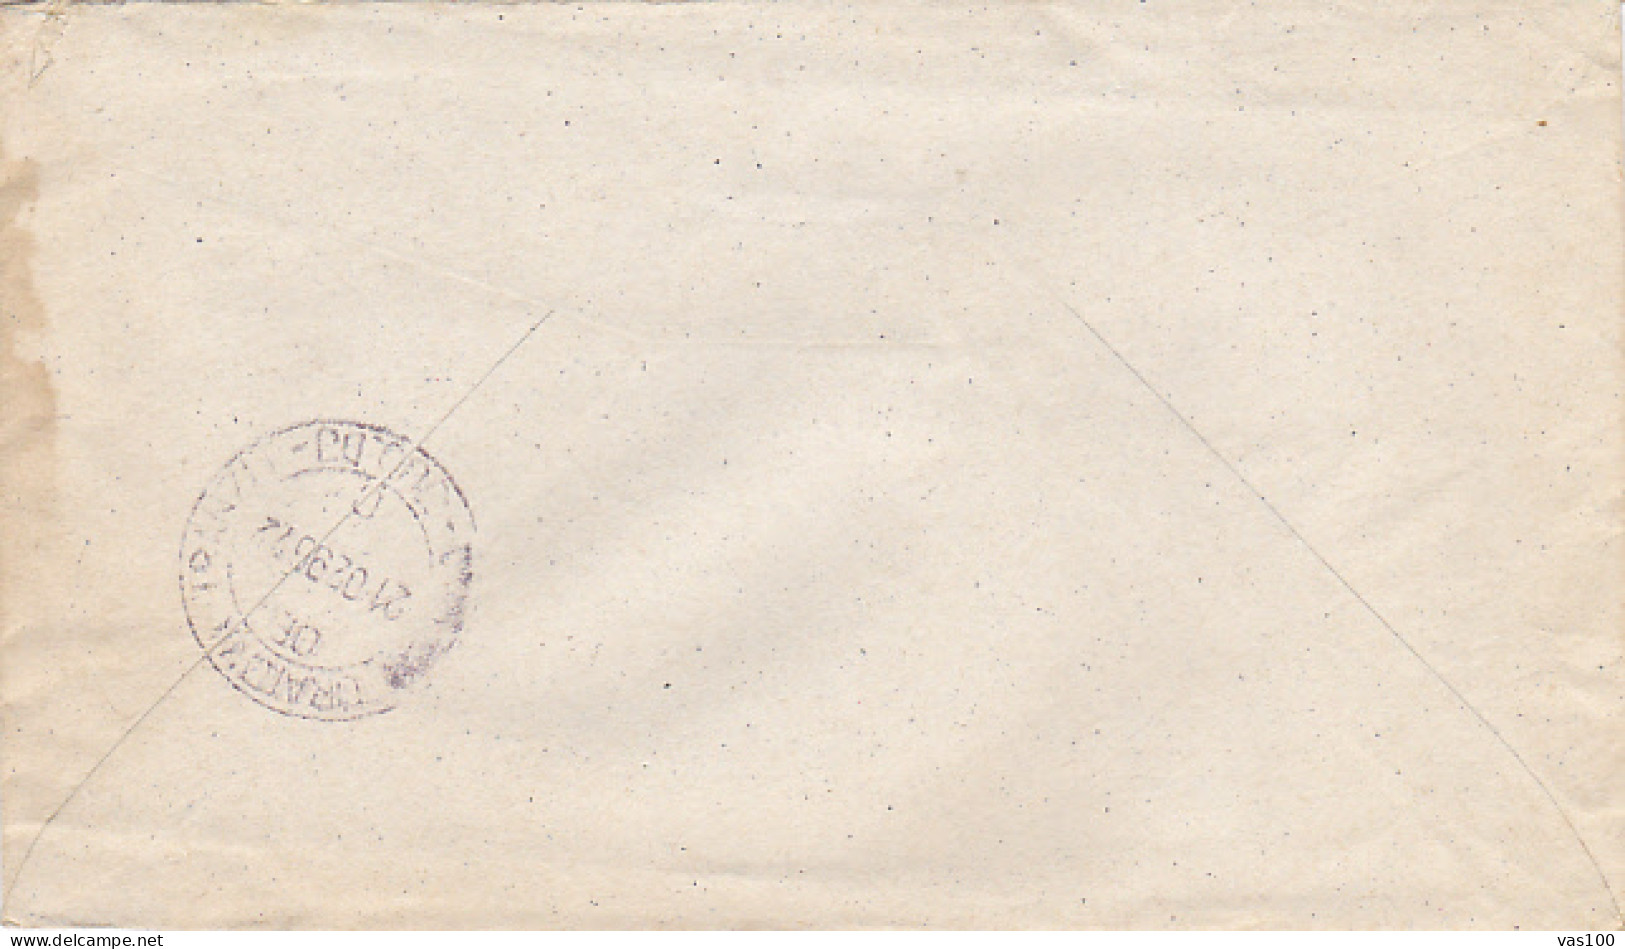 SHIP, FISH, STAMPS ON COVER, 1996, CUBA - Storia Postale